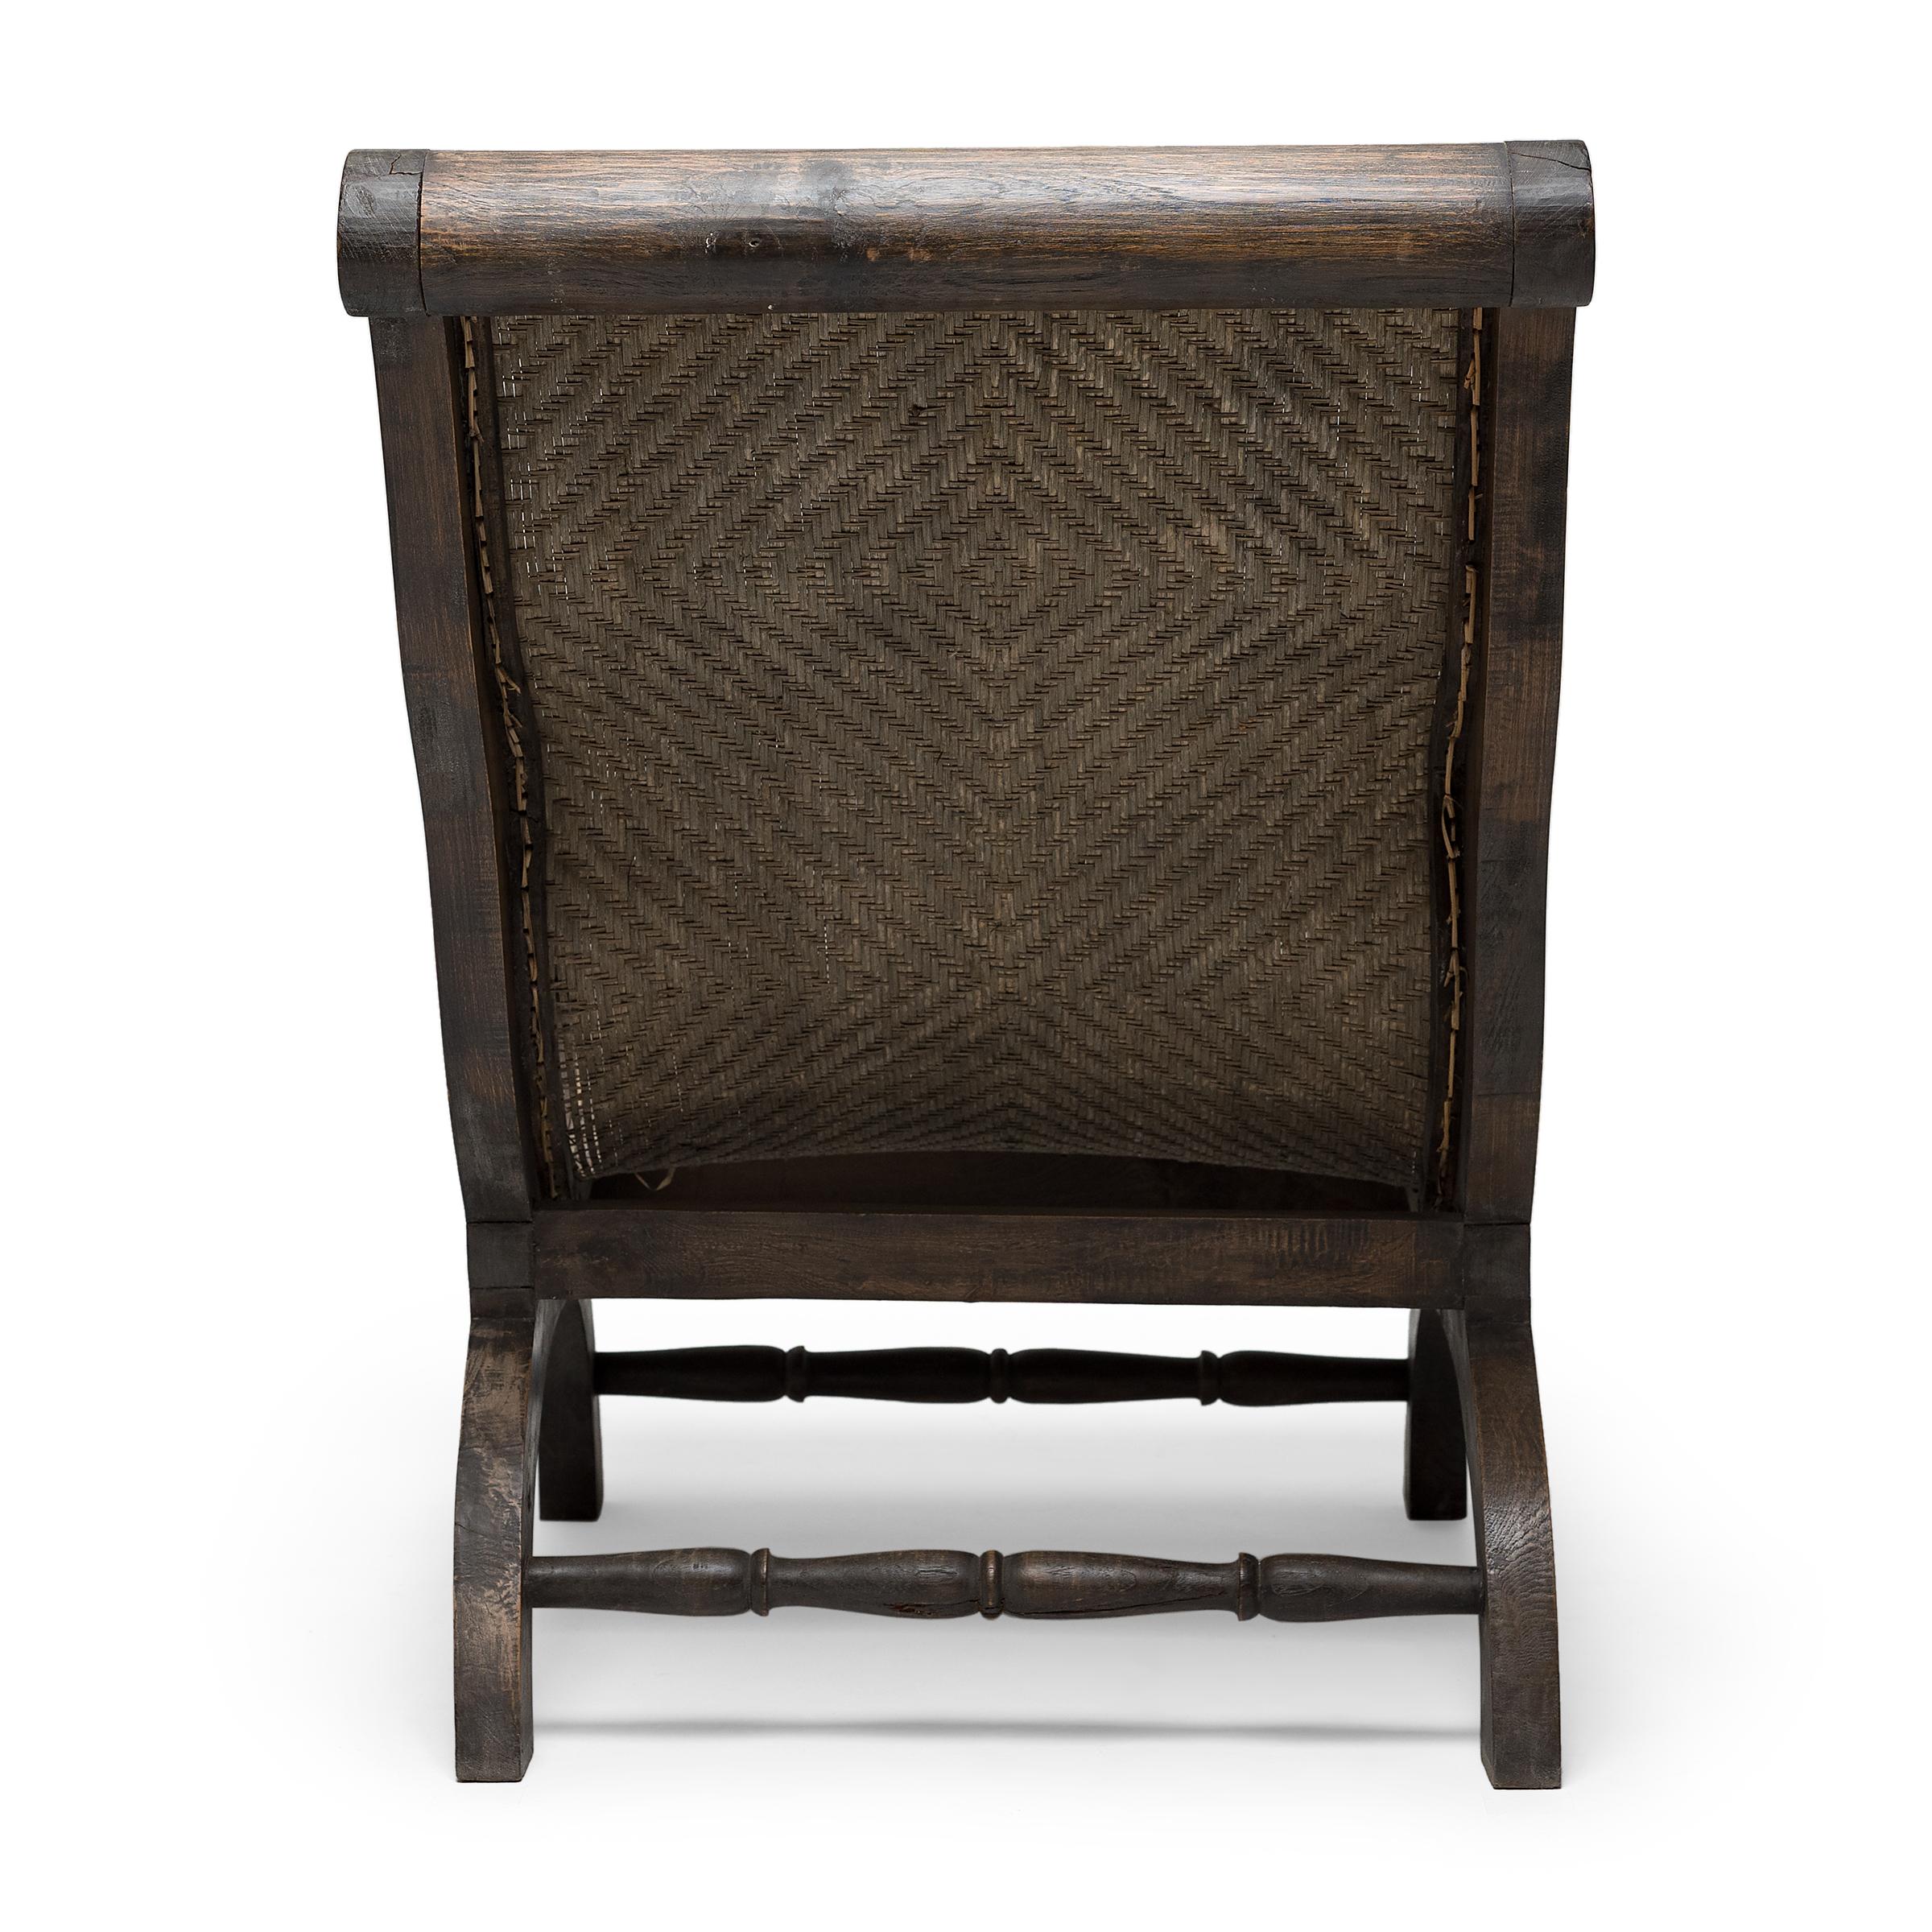 British Woven Rattan Colonial Reclining Chair, c. 1900 For Sale